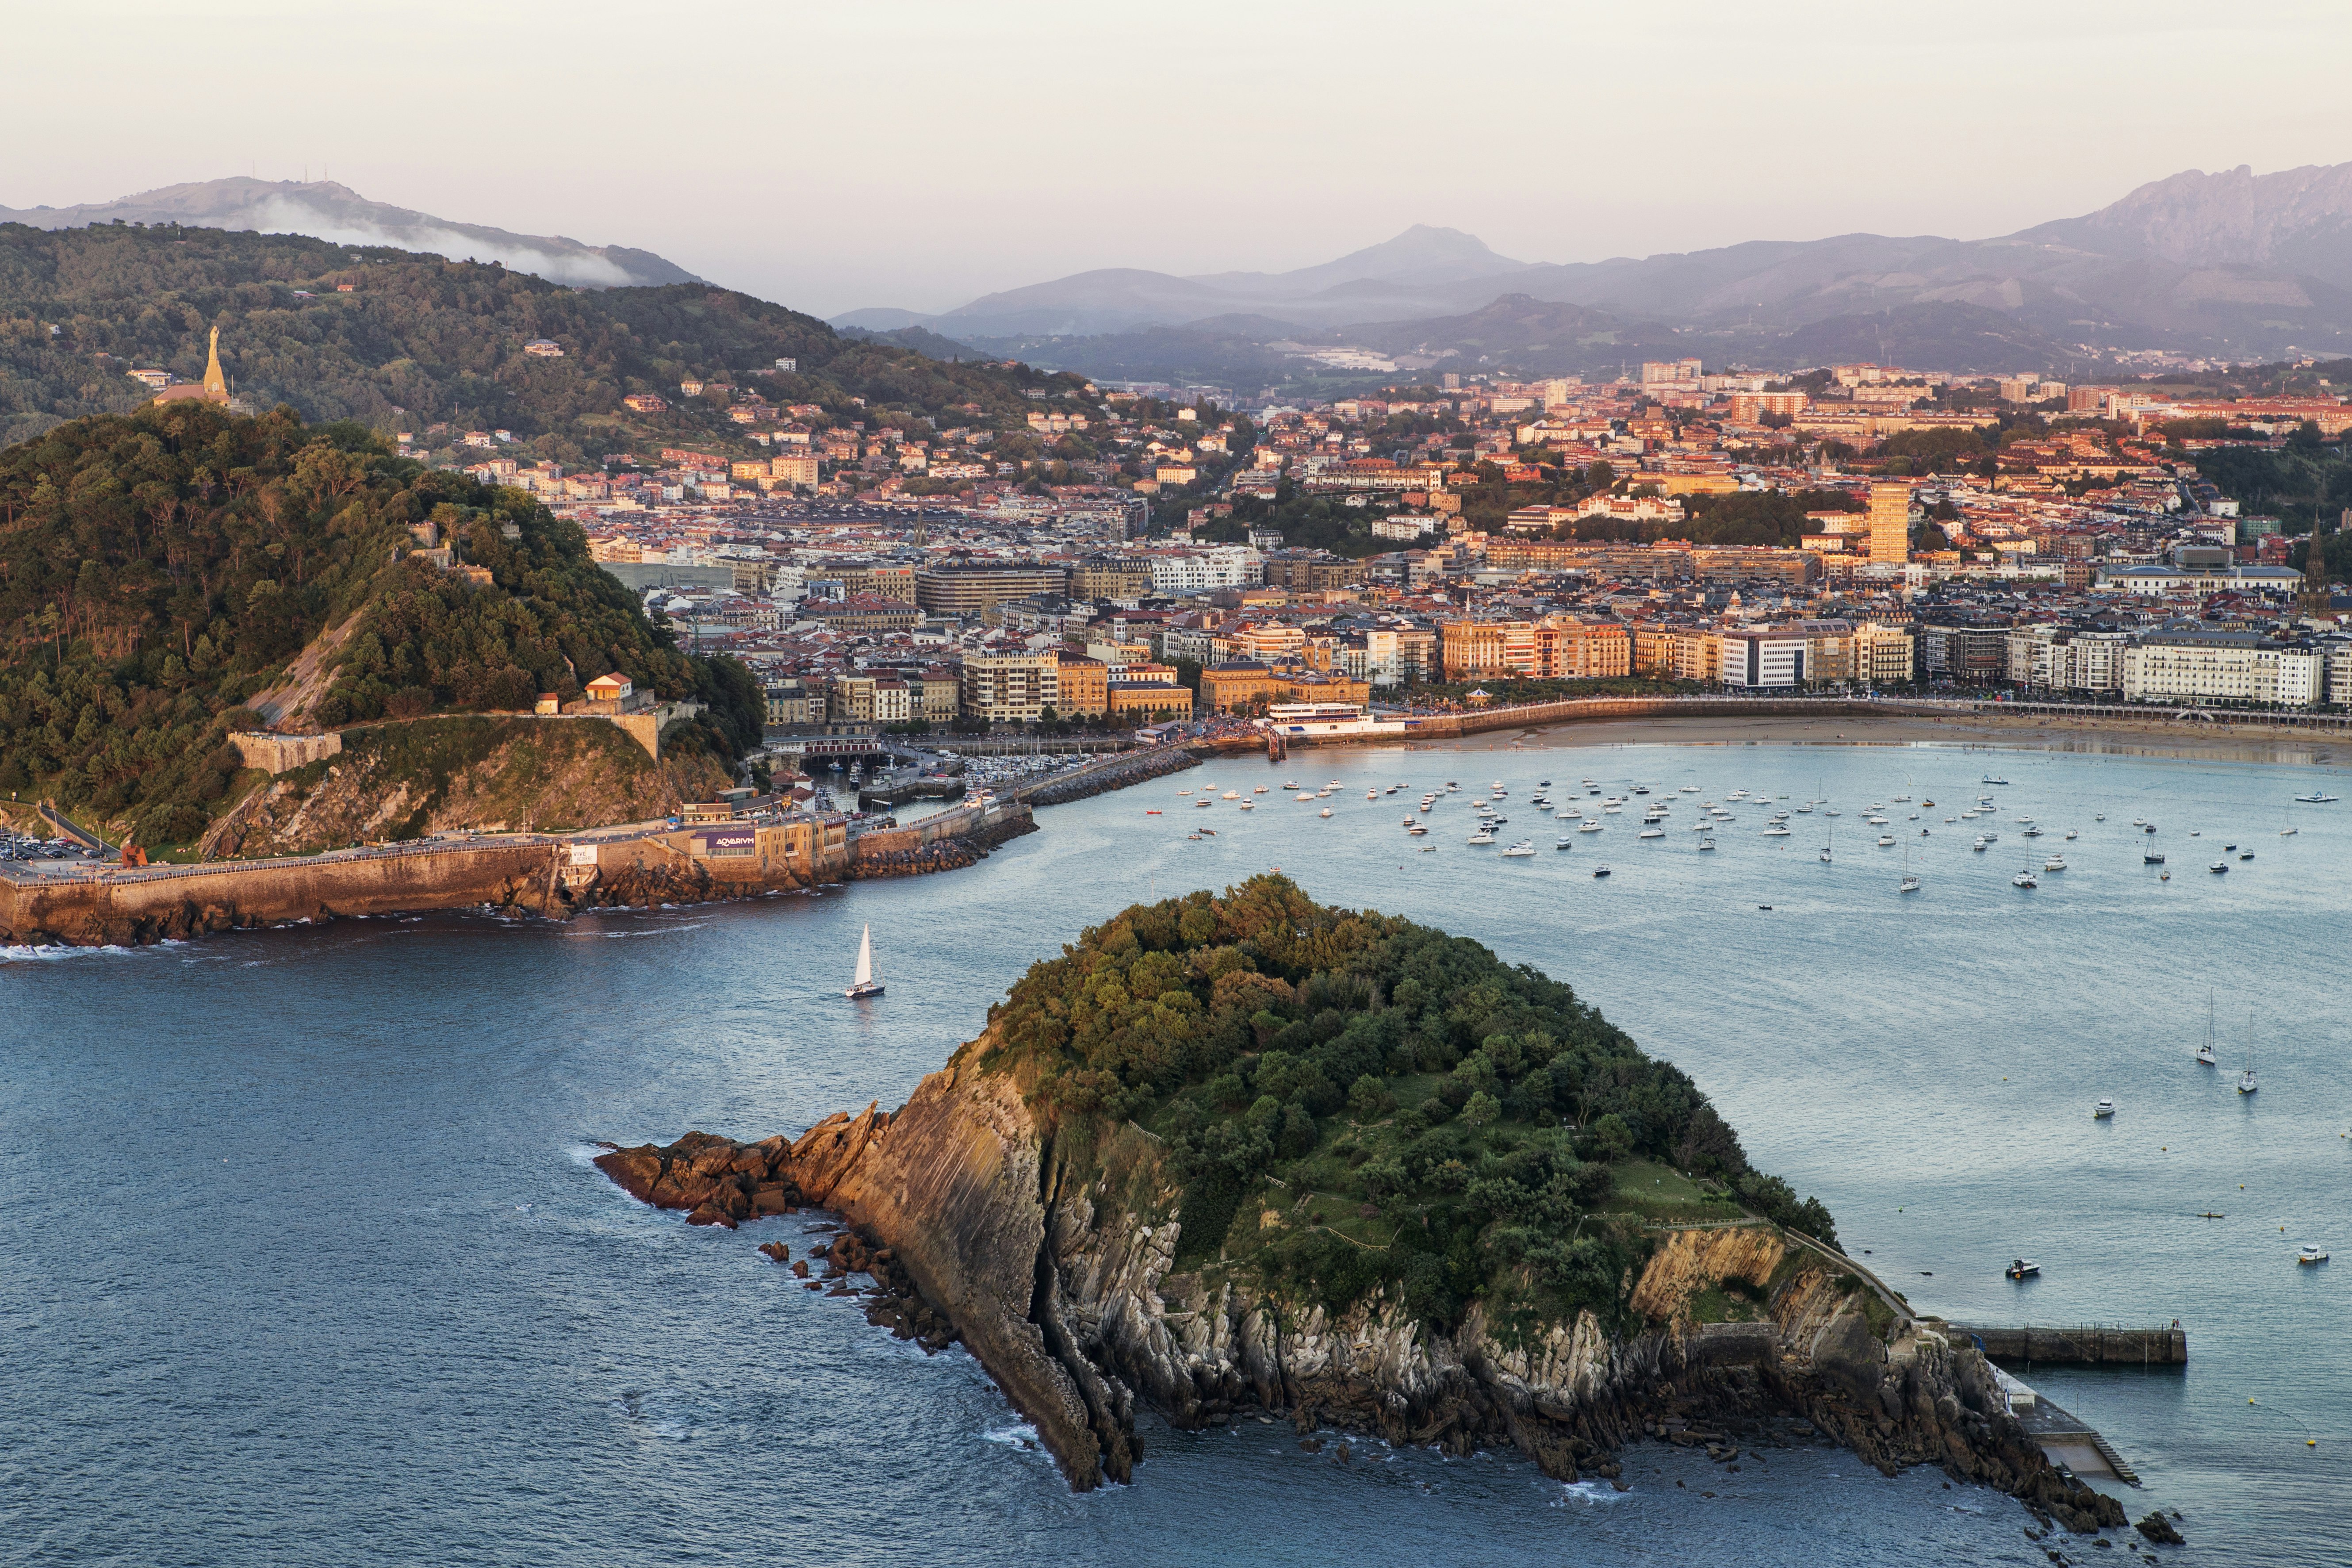 A skyline shot of San Sebastian's coastline and beachfront, with a large rocky island front and center. Buildings with a warm afternoon pink sunset glow spill across the relatively flat beach line surrounded by blue misty hills. Small boats and one large sail boat sit on the water, which is a stonewashed denim blue.